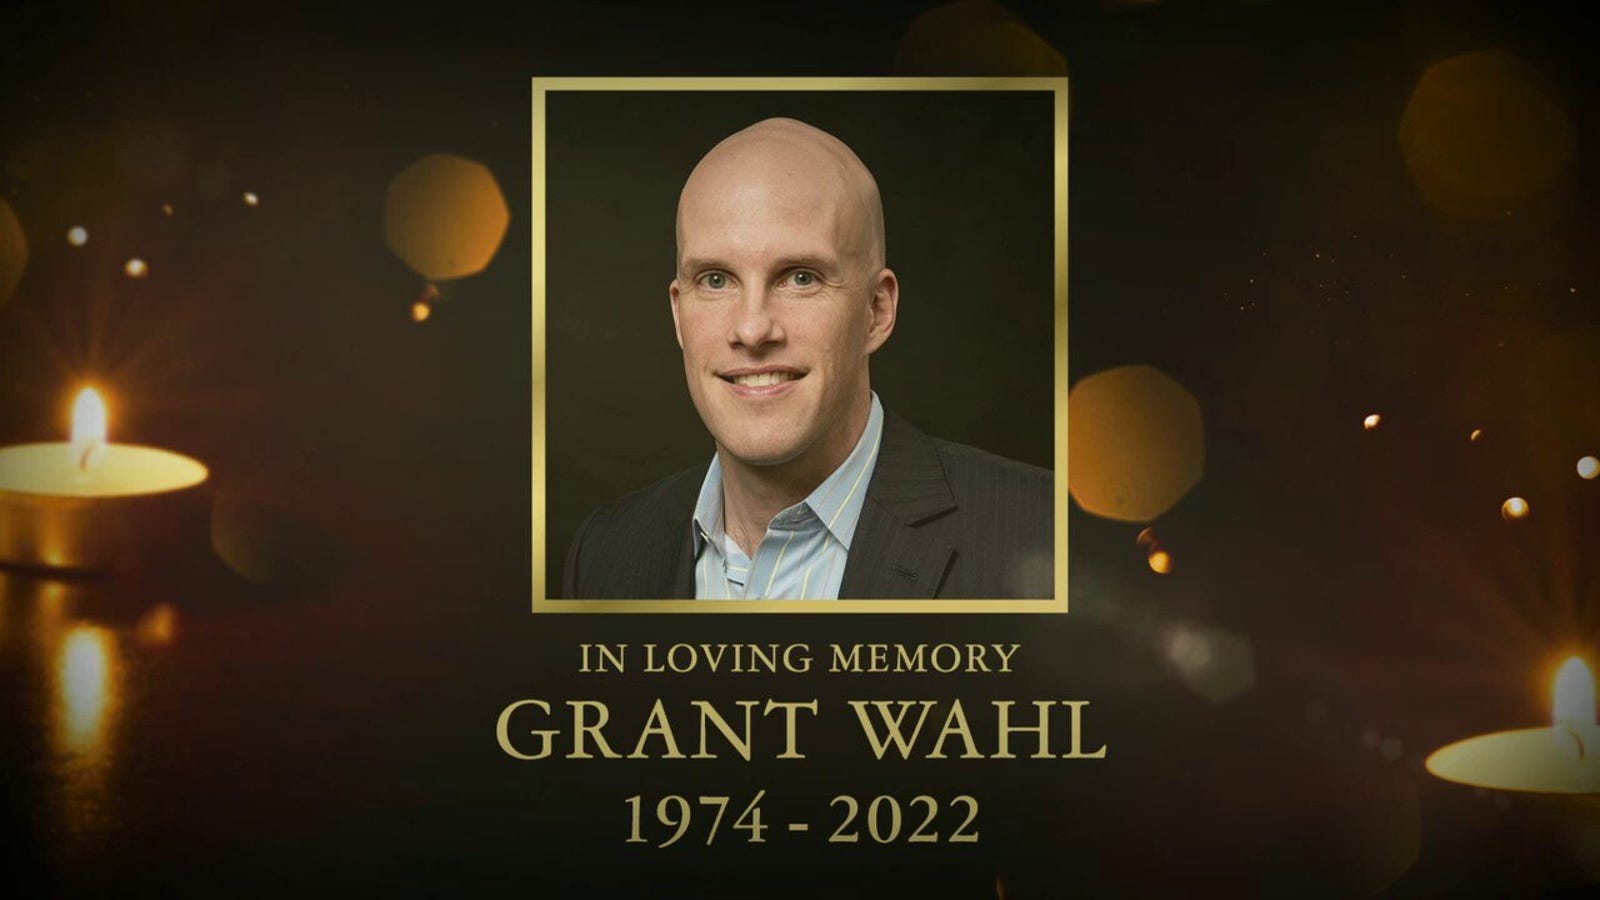 Grant Wall was a devoted colleague and friend to many at FOX Sports